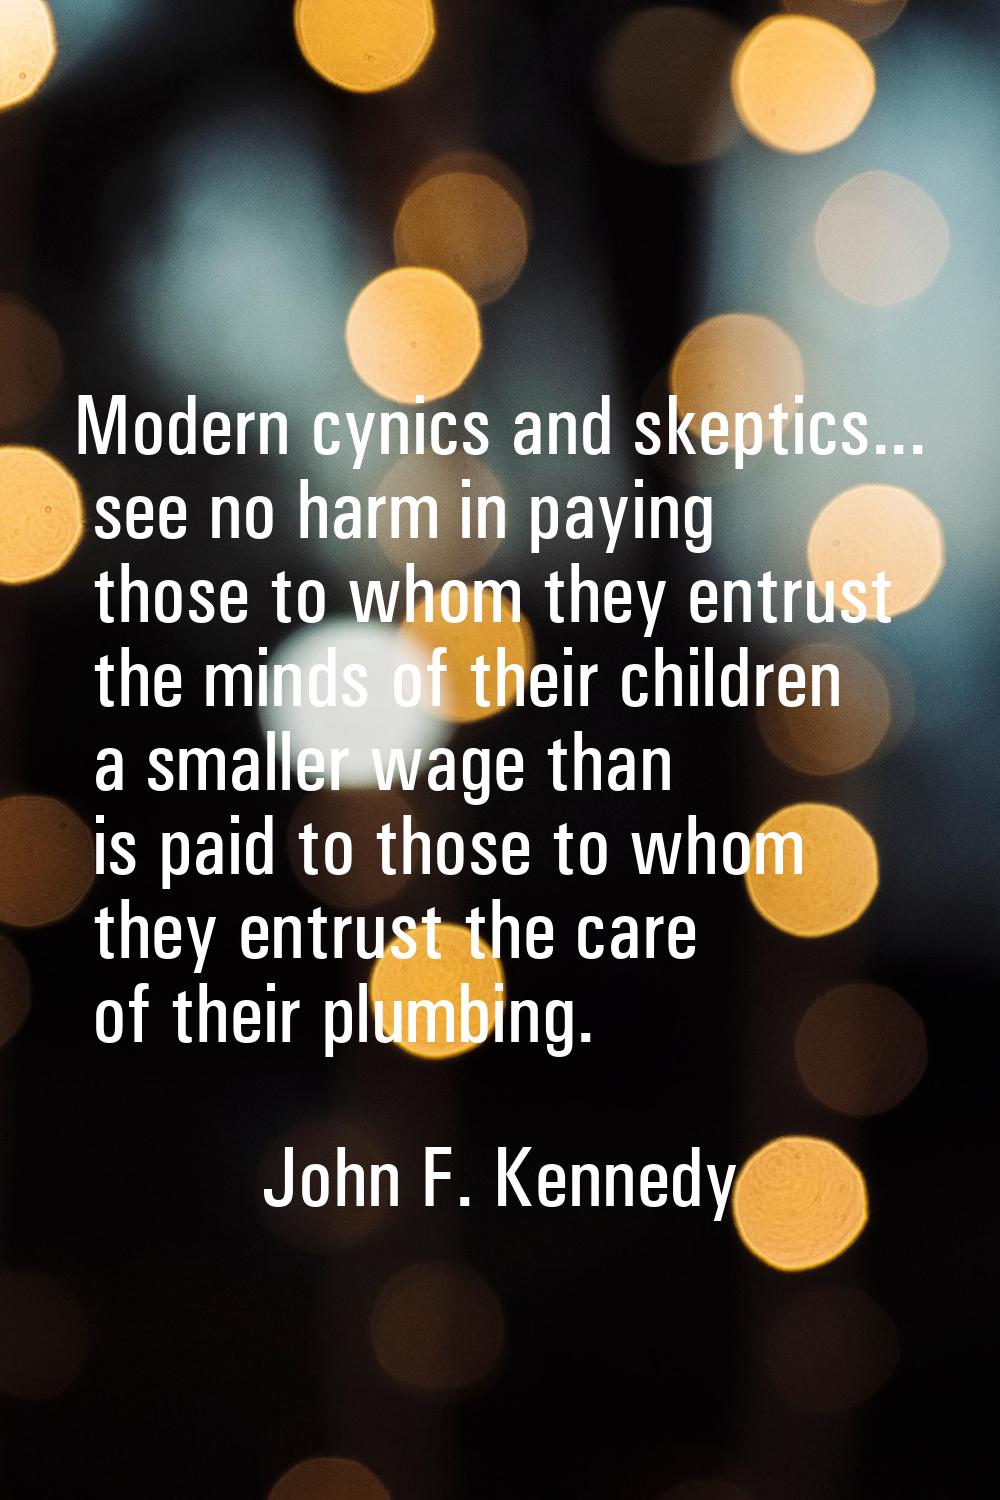 Modern cynics and skeptics... see no harm in paying those to whom they entrust the minds of their c